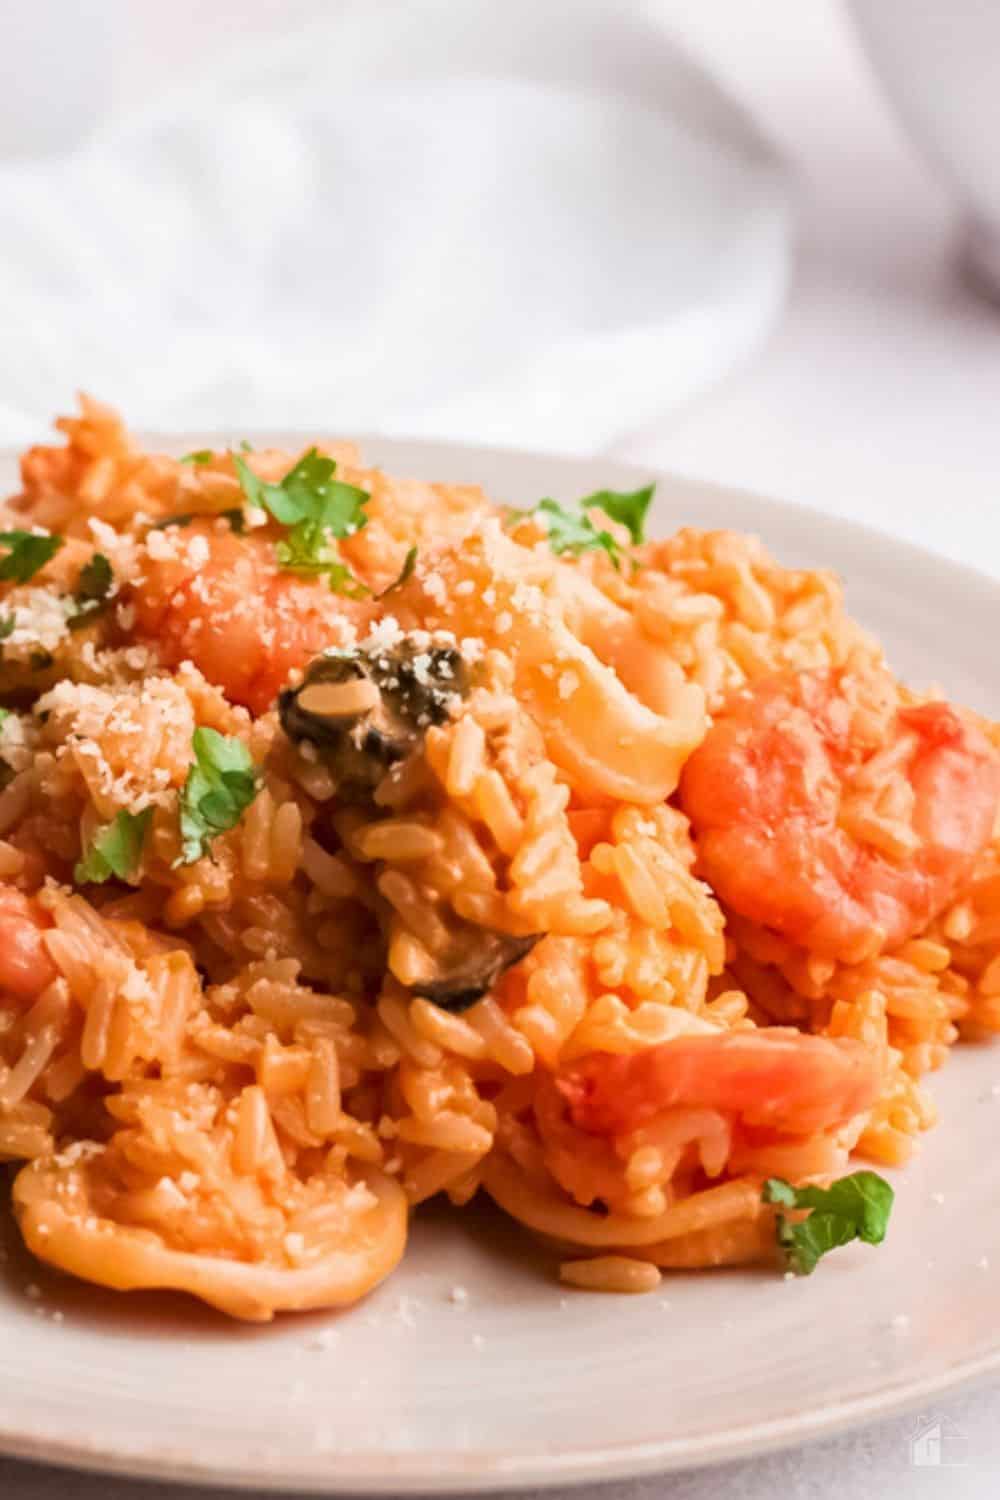 Arroz con Mariscos, or Peruvian rice with seafood, is a great dish for a hearty meal. Loaded with shrimp, squid, and clams, this rice dish will undoubtedly fill your belly. via @mystayathome